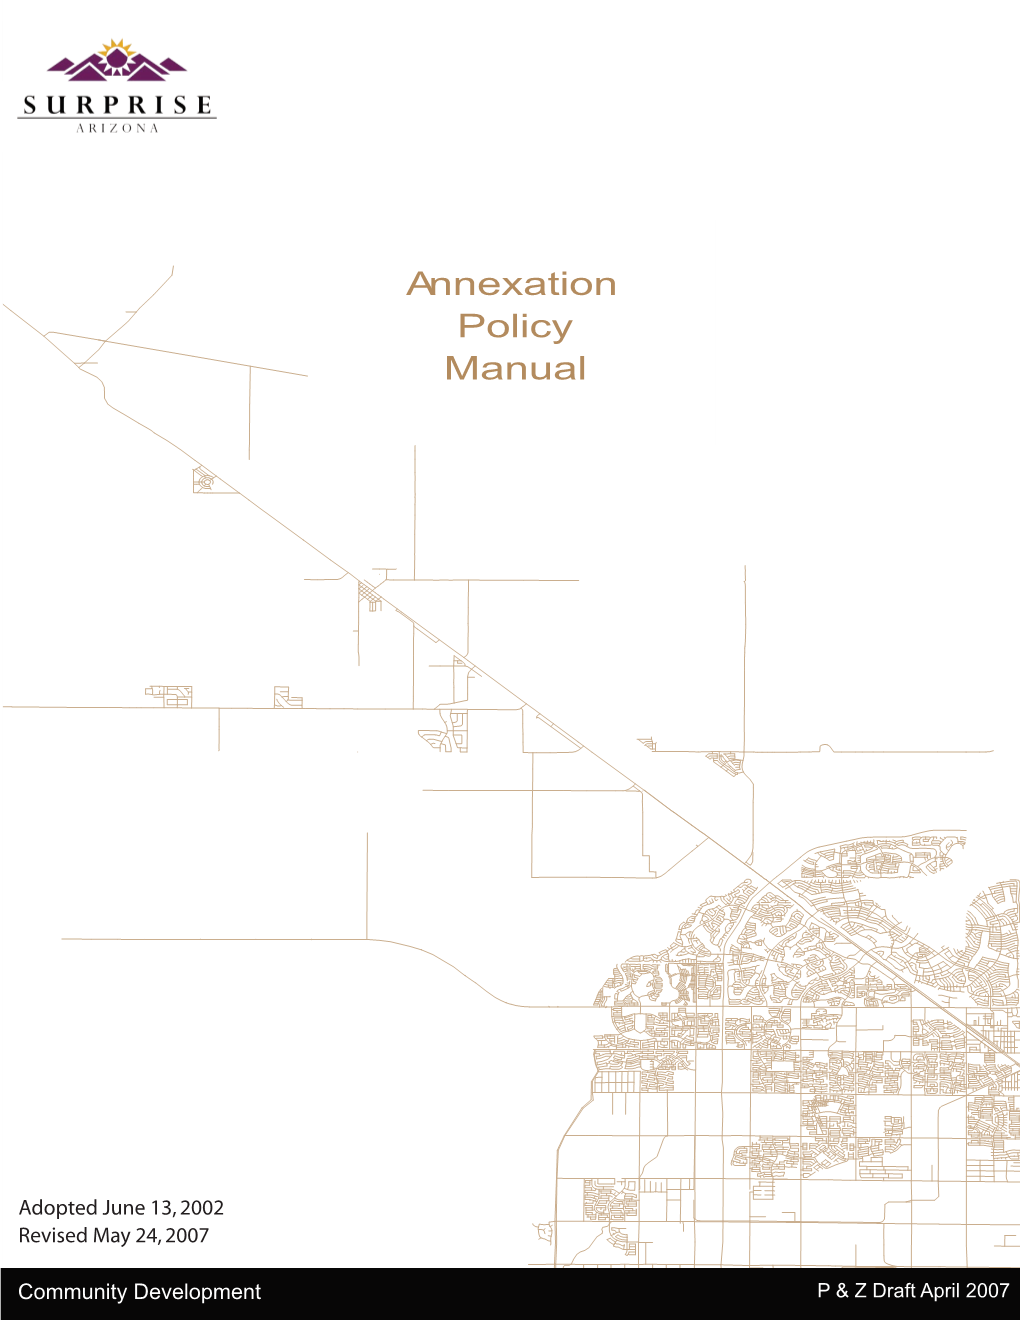 Annexation Policy Manual